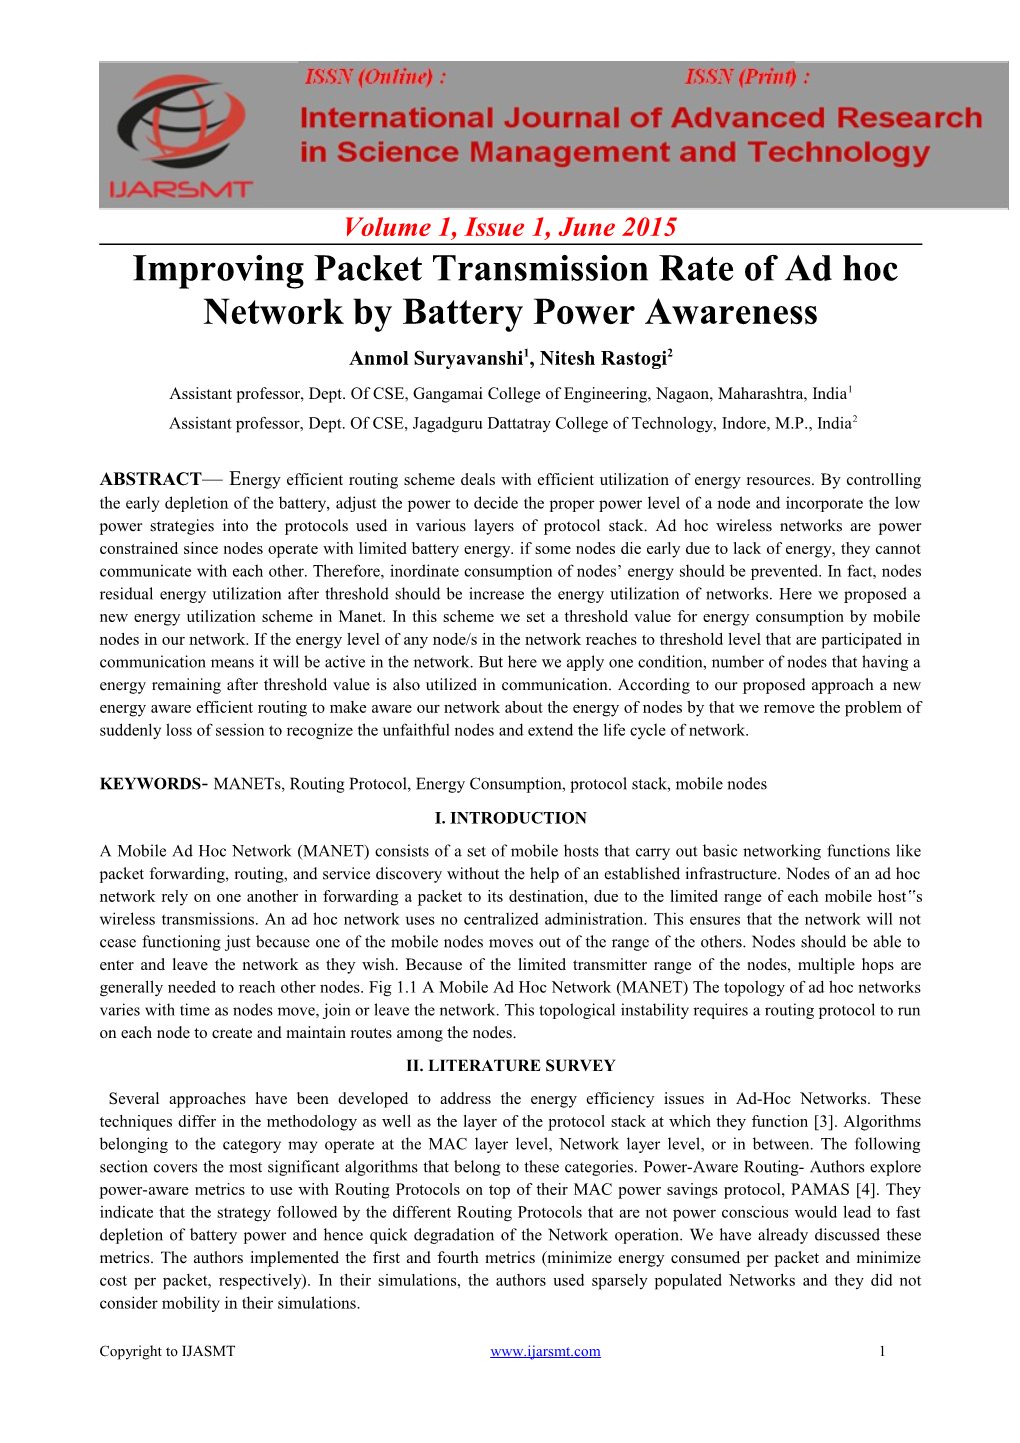 Improving Packet Transmission Rate of Ad Hoc Network by Battery Power Awareness